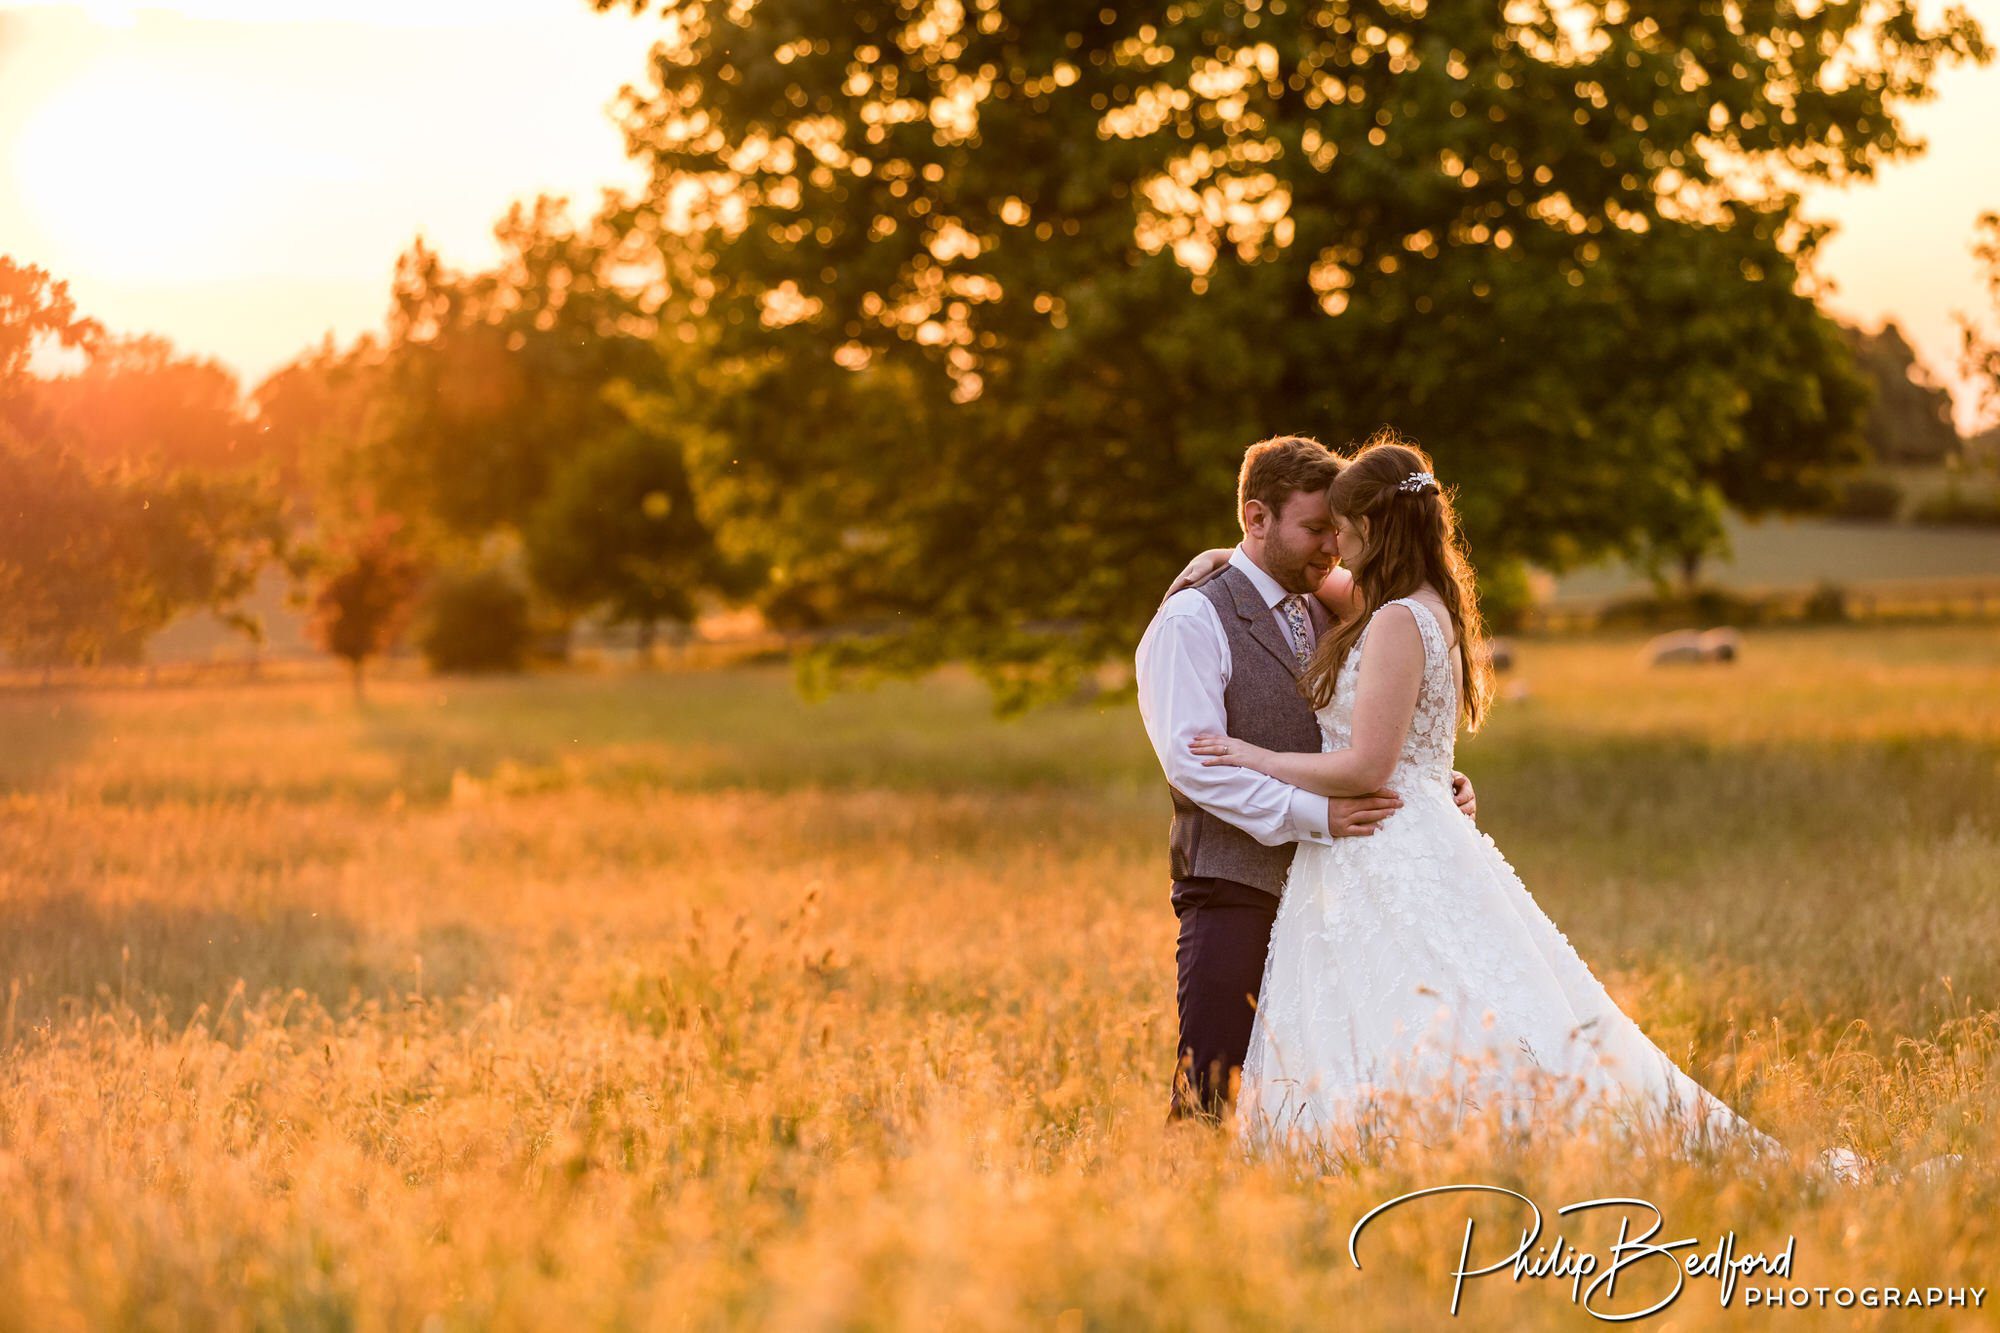 Bride and groom in a summer Meadow at the golden hour.